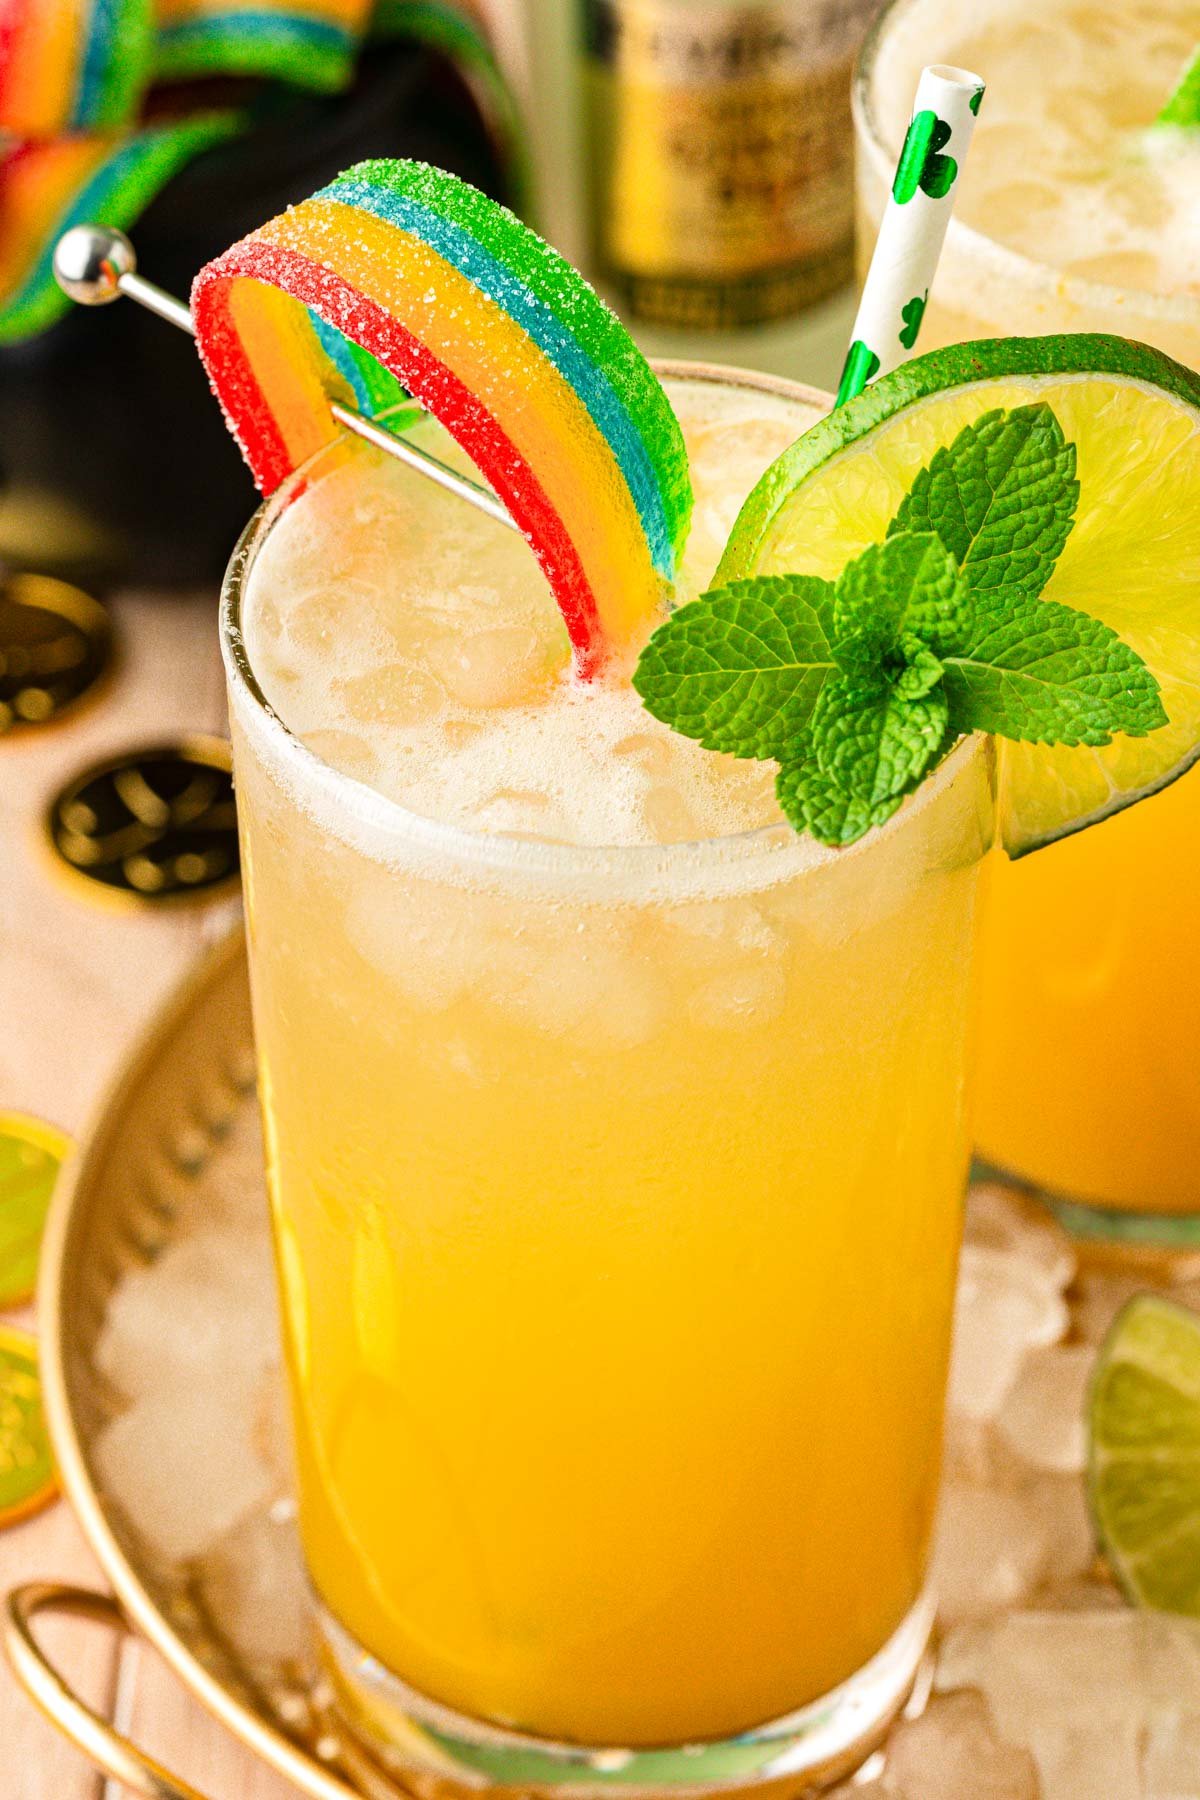 A glass with a yellow drink in it garnished with mint, lime wheel, and rainbow candy.